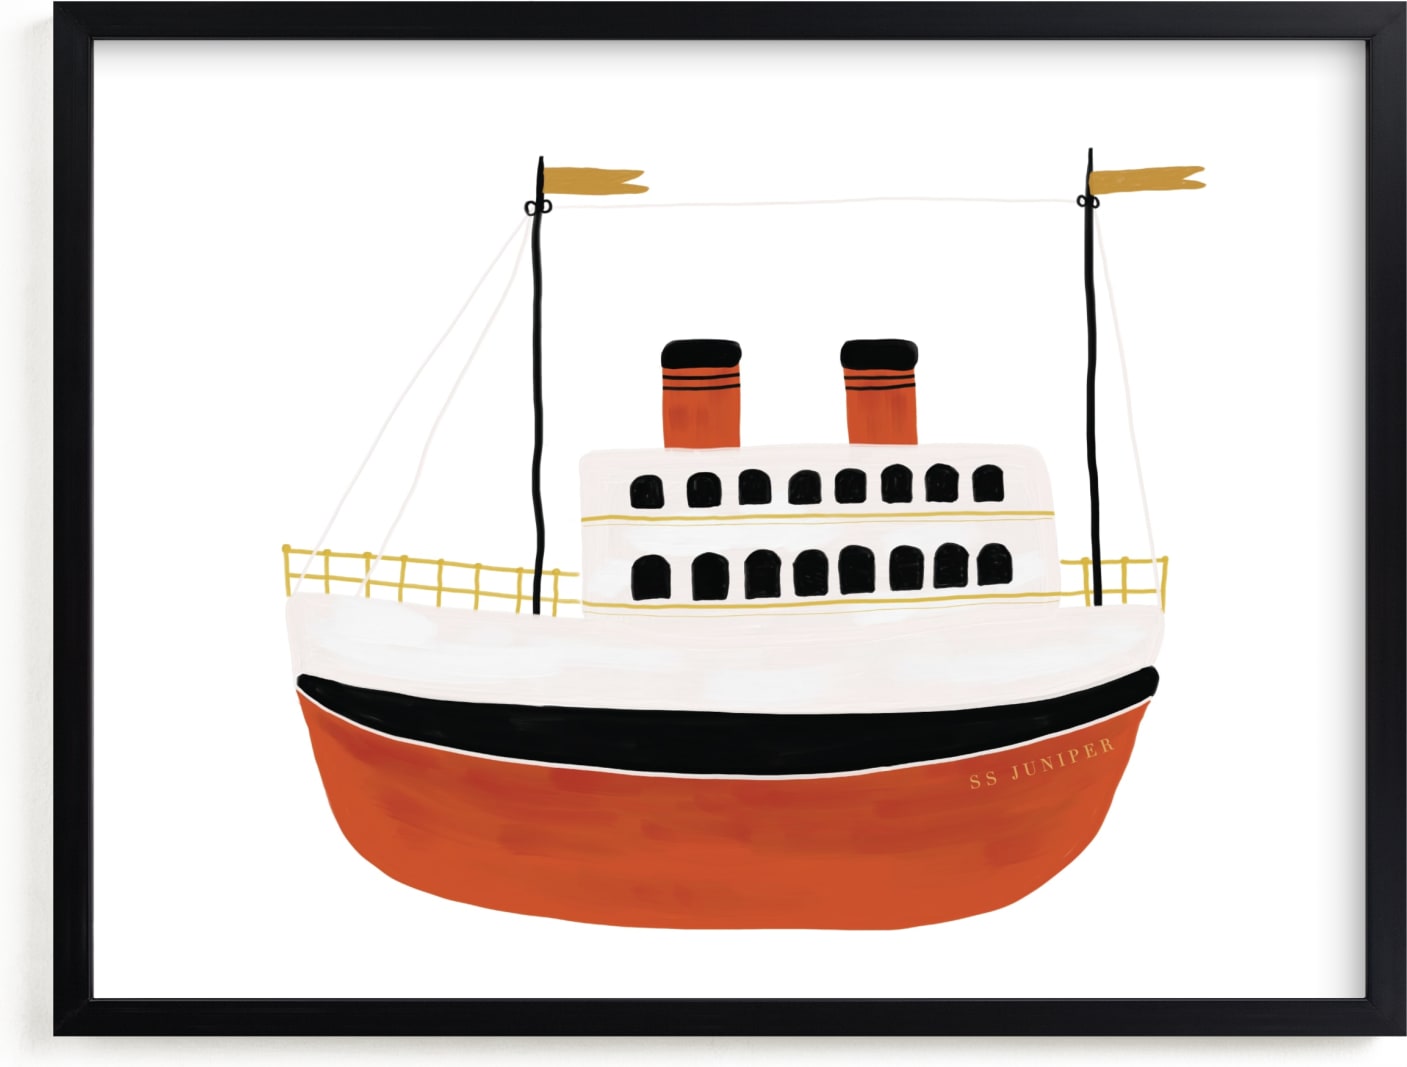 This is a black personalized art for kid by Maja Cunningham called Schooner II.